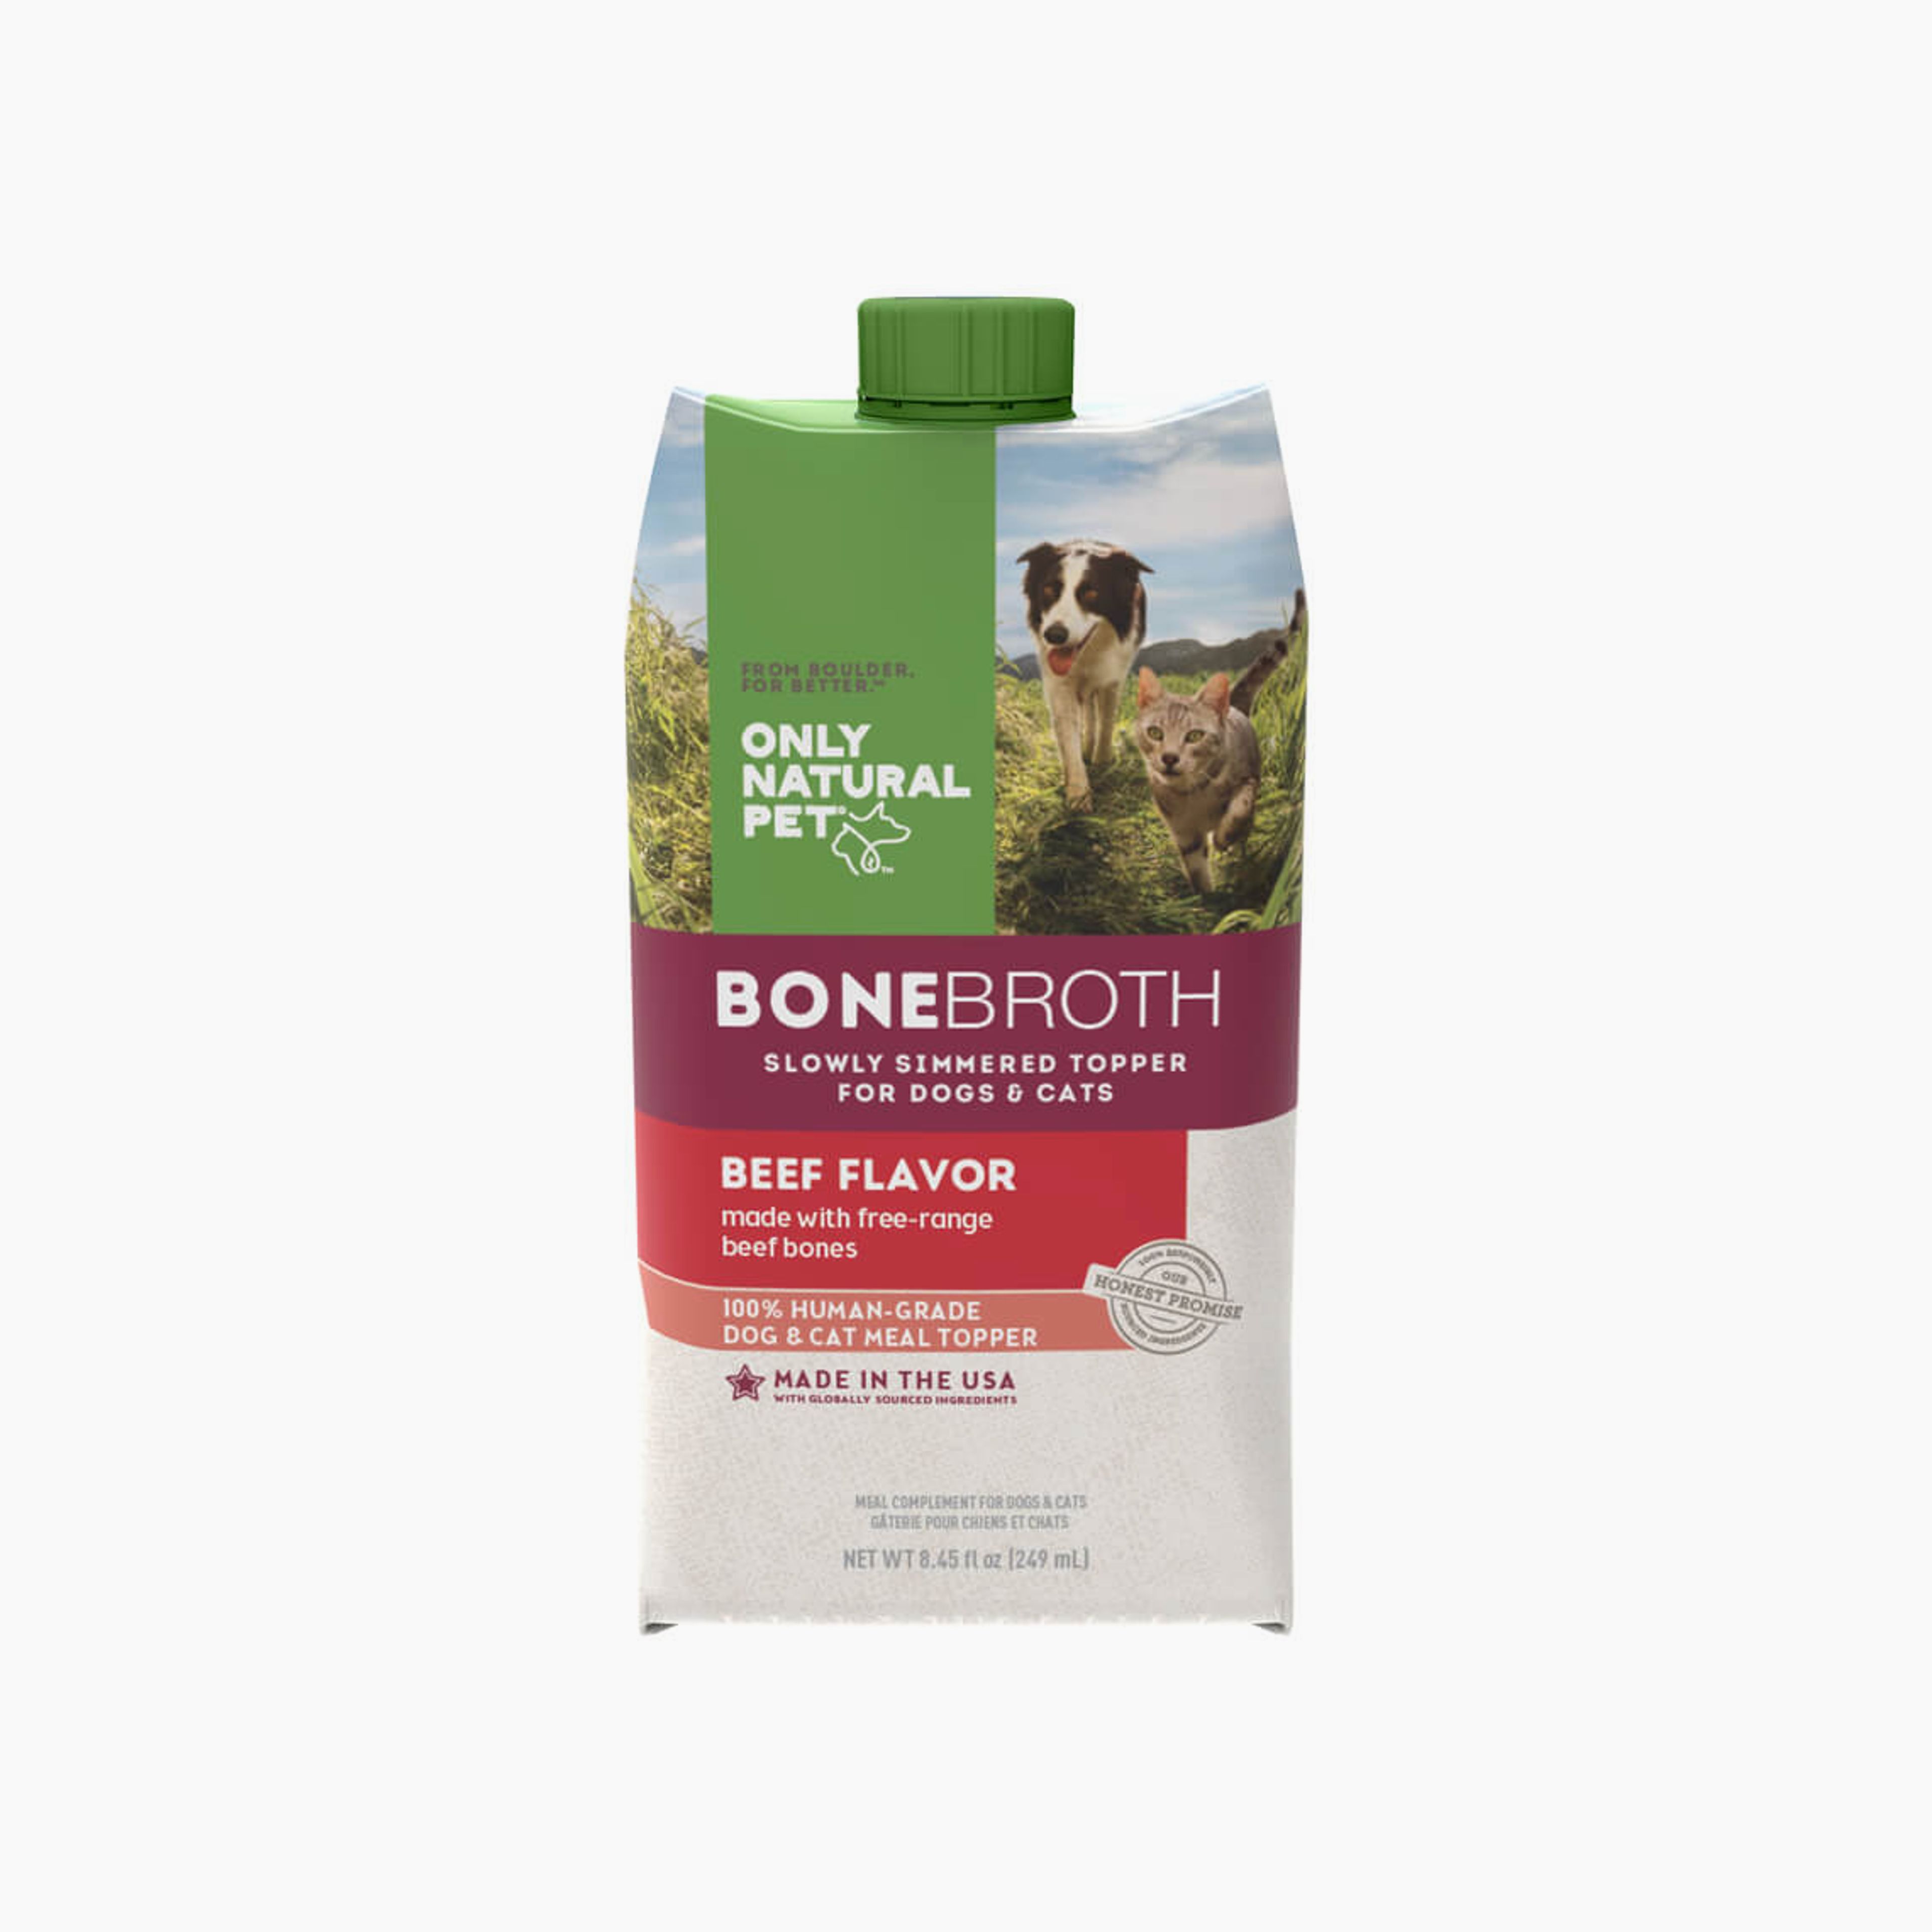 Only Natural Pet Bone Broth Beef Flavor Dog & Cat Meal Topper